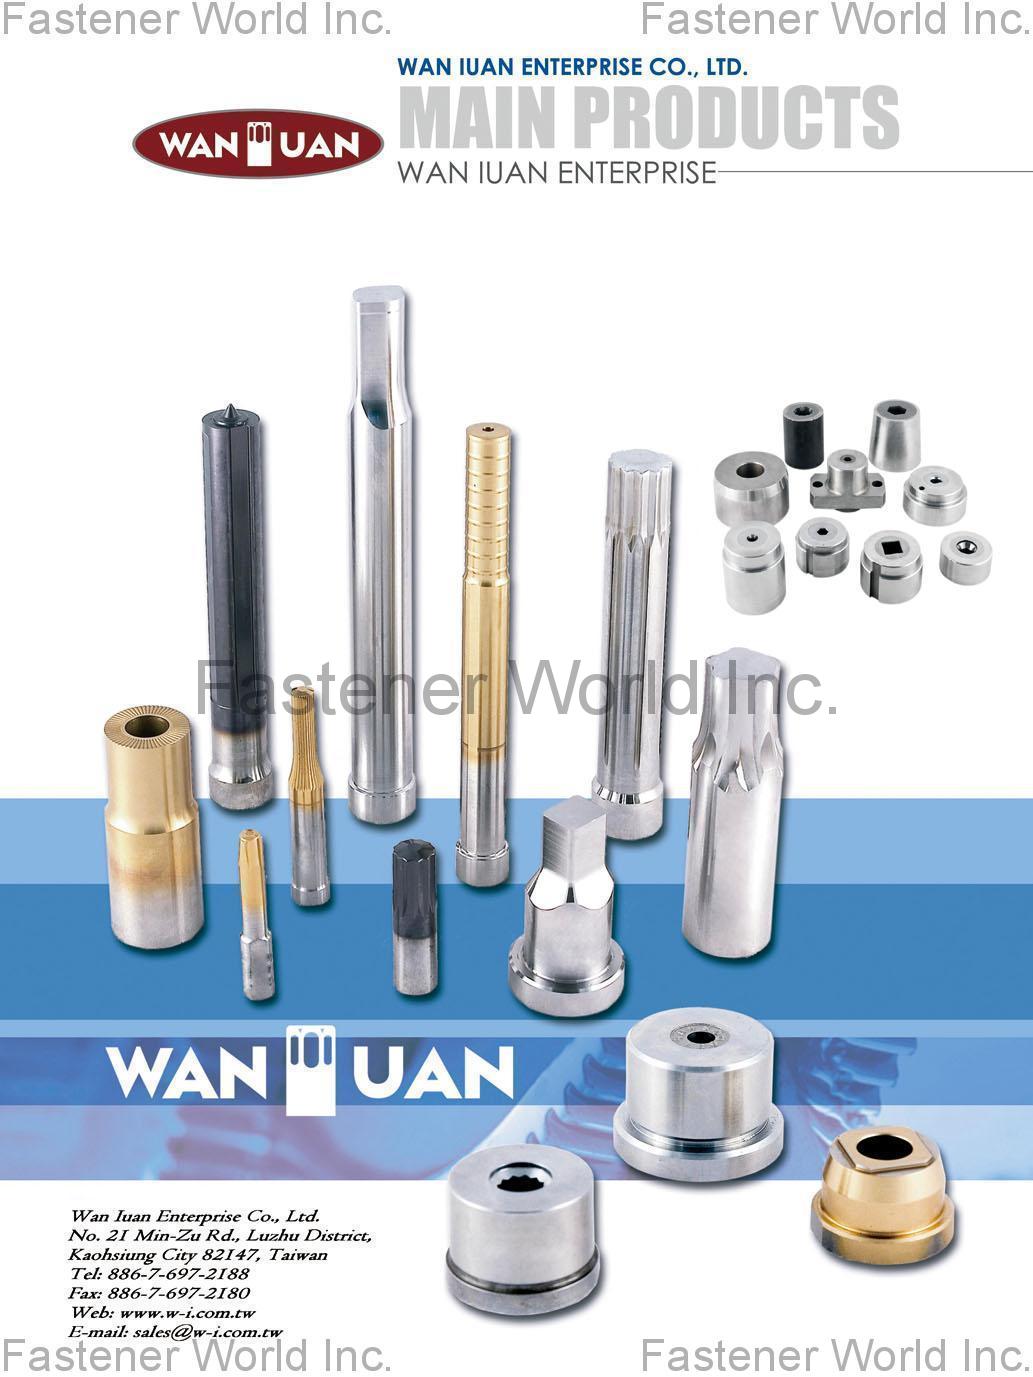 WAN IUAN ENTERPRISE CO., LTD.  , Second Punch, Polygon Punch, Customize Punch, Round Punches Pins, Screw Dies, Carbide Punch, Round Punch, Machine Parts , Punches